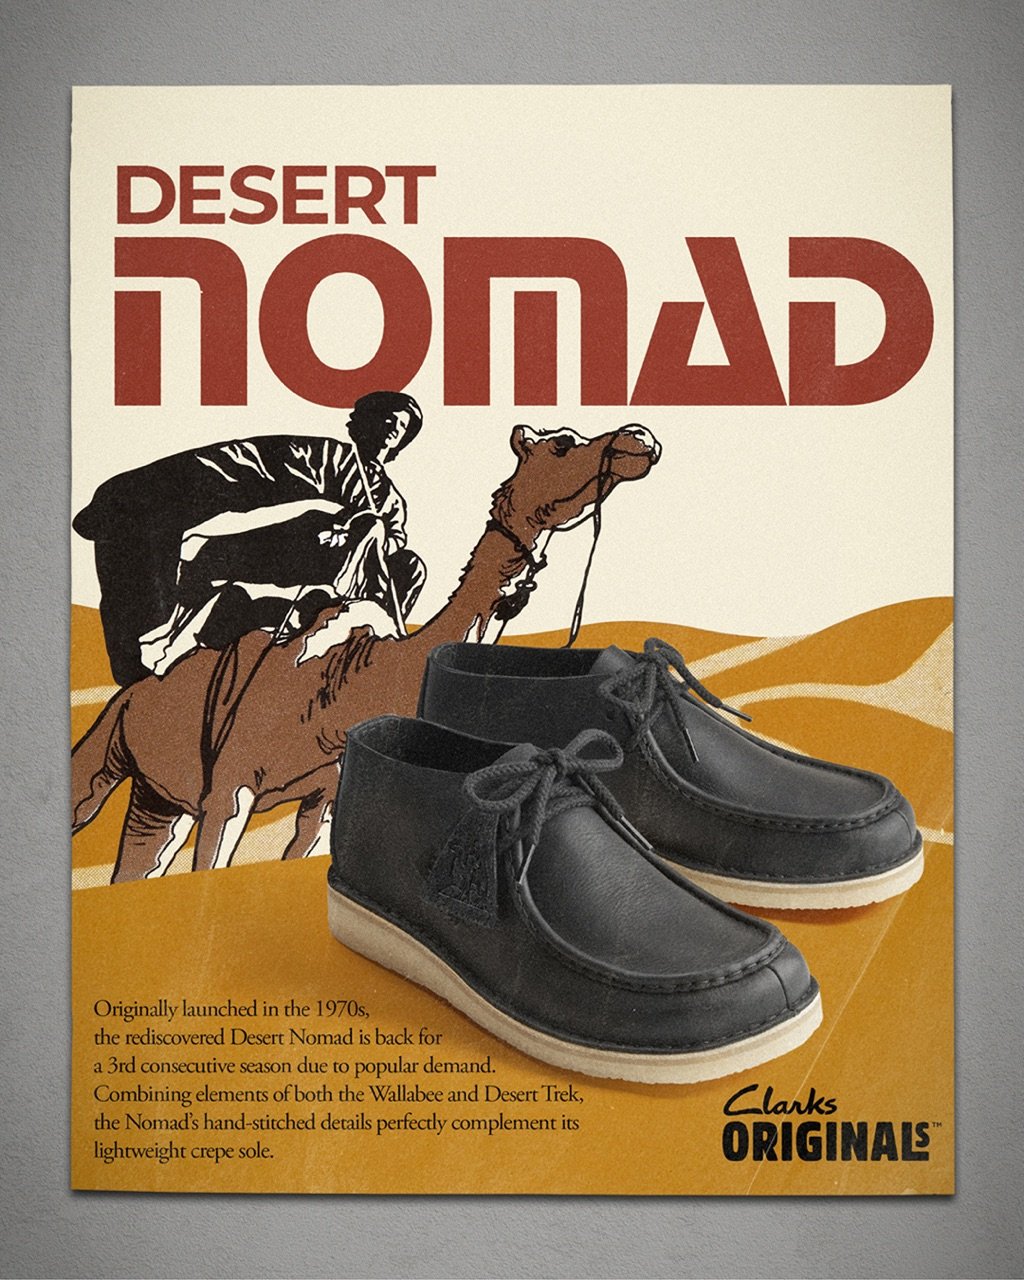 Desert Nomad. Originally launched in the 1970s, the rediscovered Desert Nomad is back for a 3rd consecutive season due to popular demand. Combining elements of both the Wallabee and Desert Trek, the Nomad's hand-stitched details perfectly complement its lightweight crepe sole.